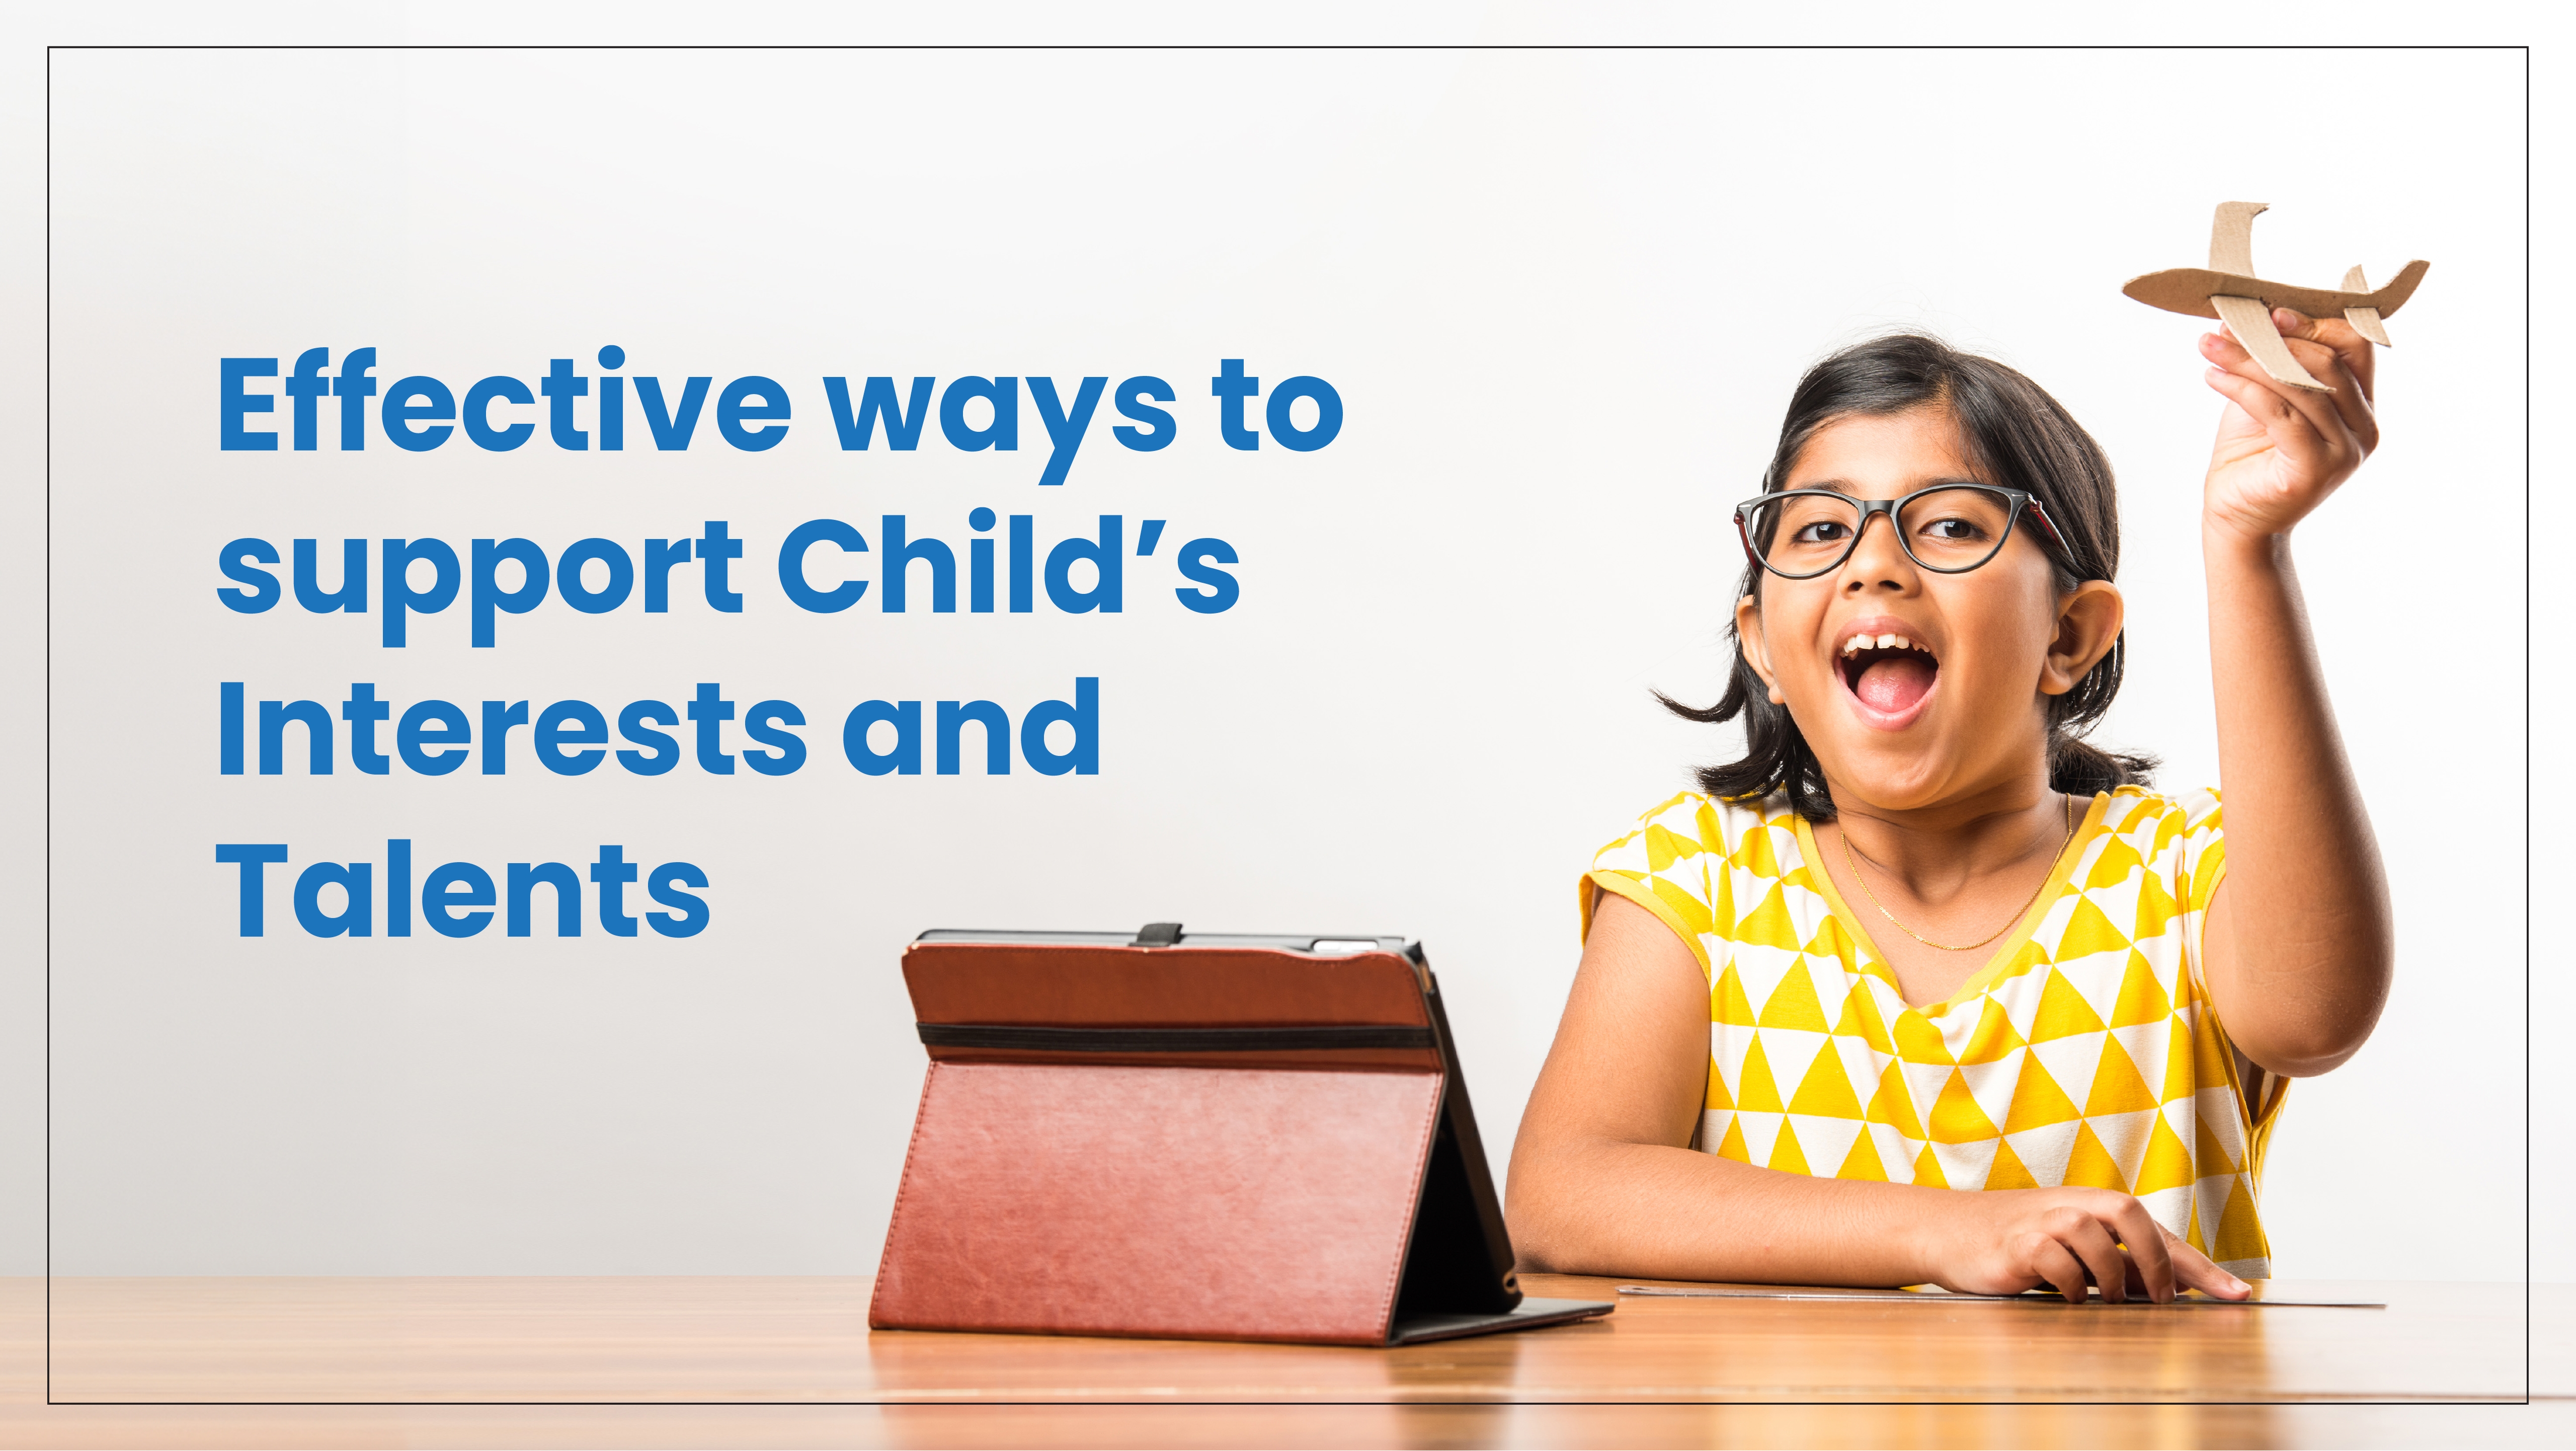 Effective ways to support child's interests and talents